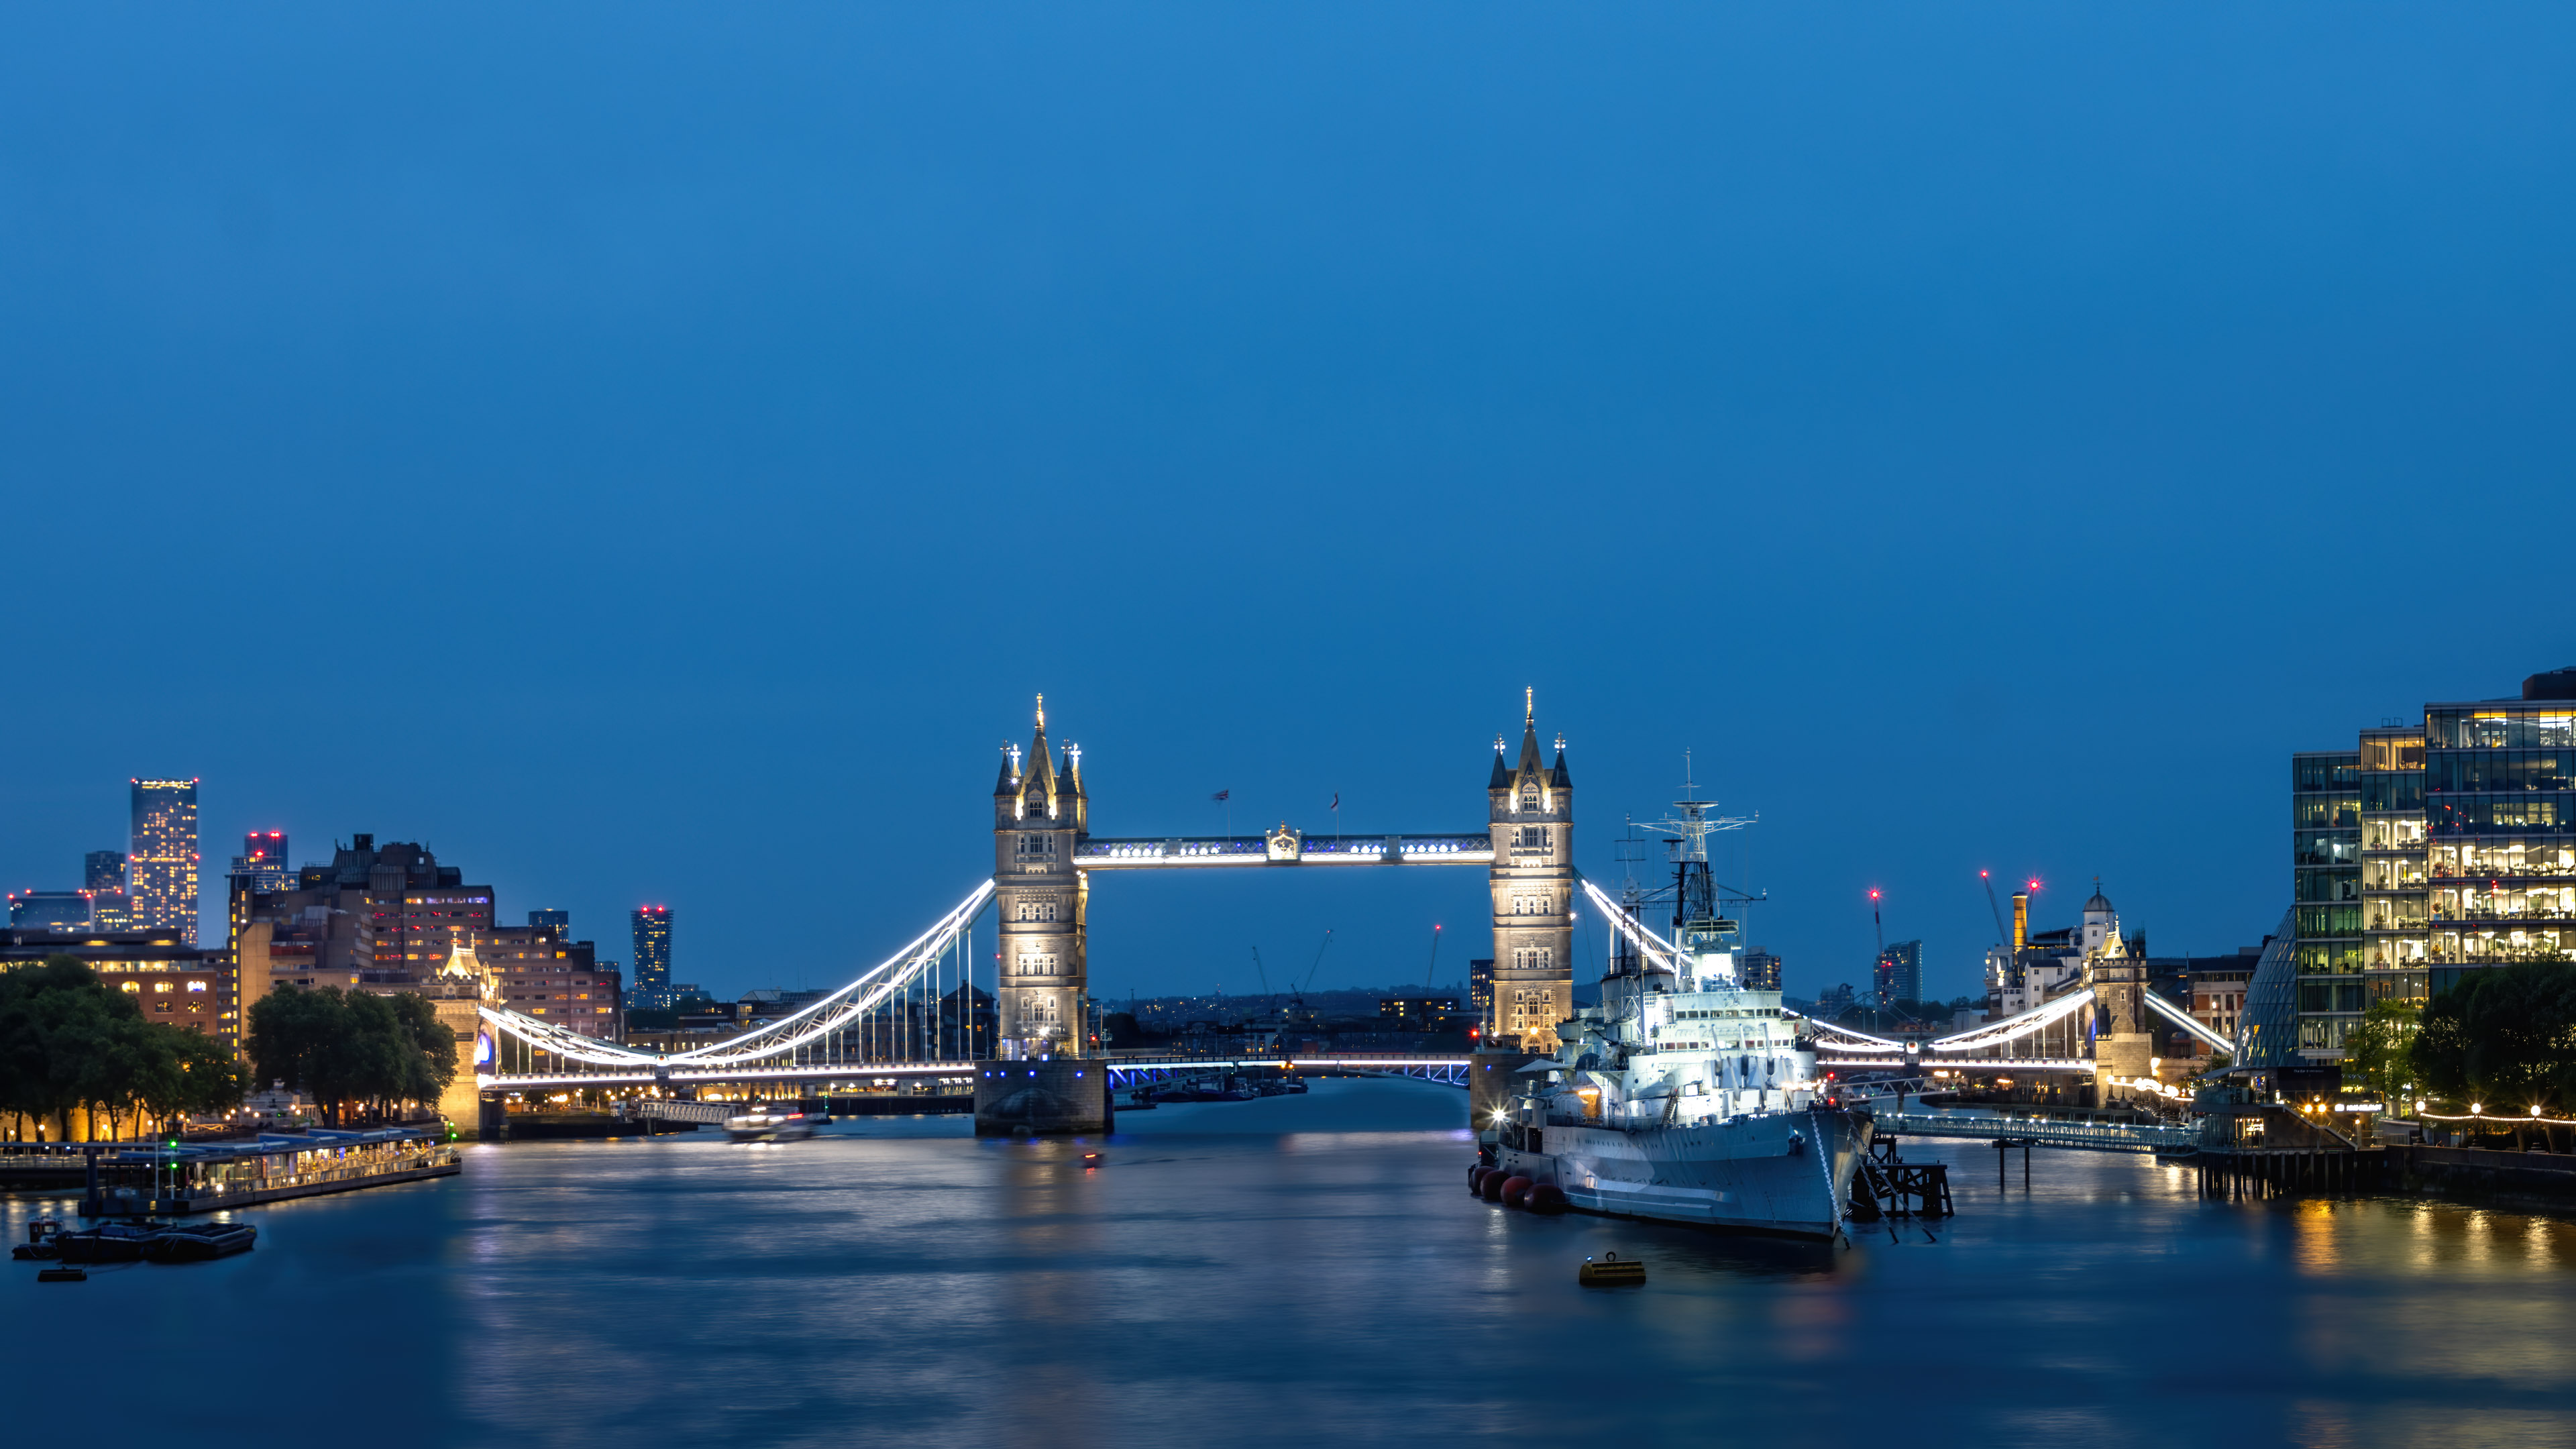 Experience the beauty of London's Tower Bridge at night with this high-quality wallpaper. Perfect for anyone who loves the city life.